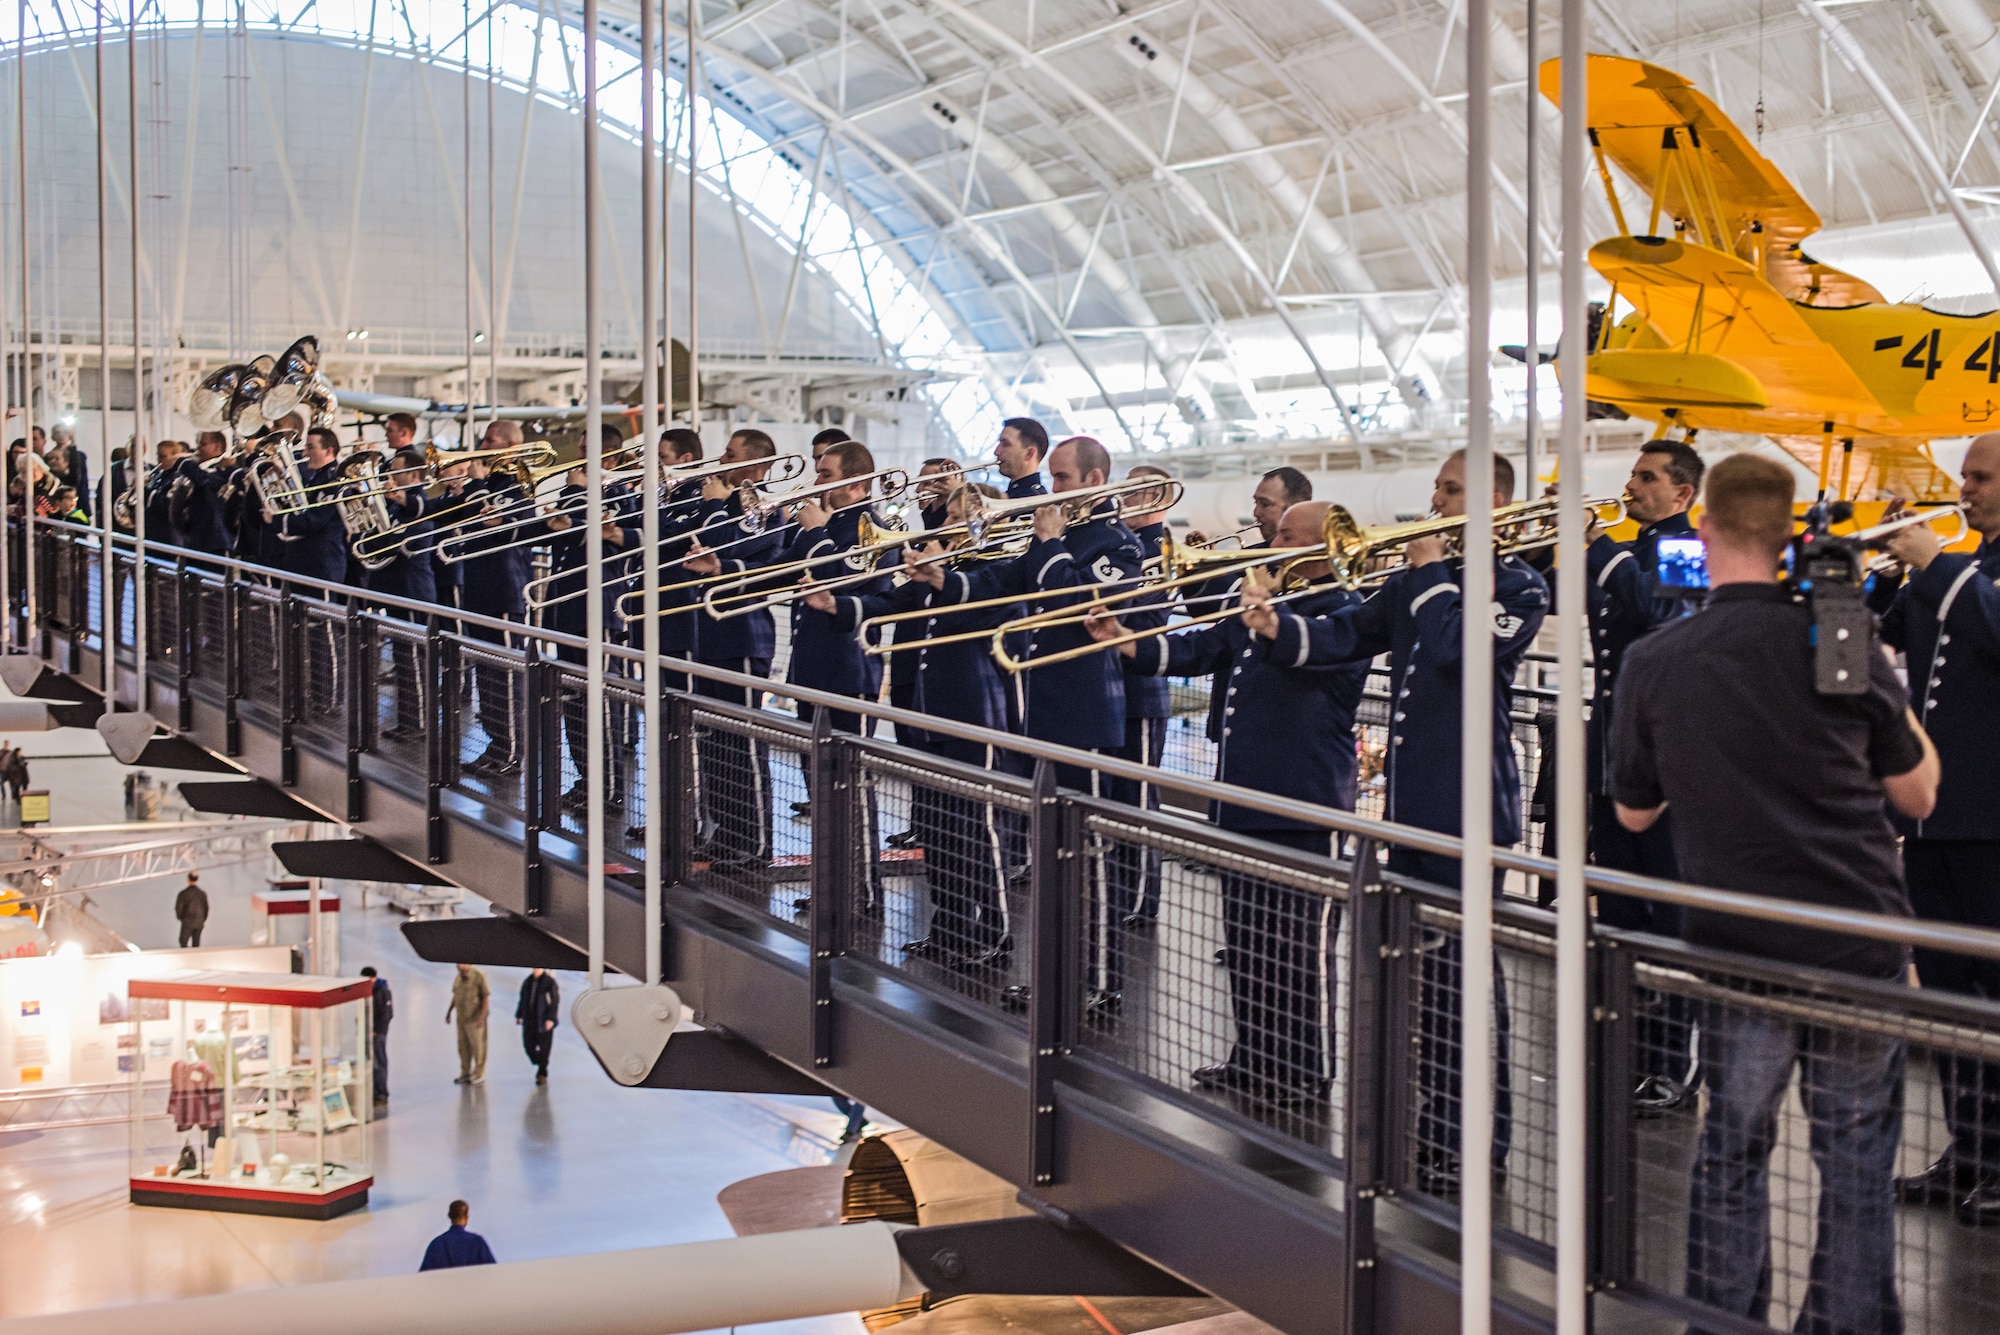 The United States Air Force Band performs a holiday flash mob Dec. 2, 2014, at the Smithsonian National Air and Space Museum Udvar-Hazy Center in Chantilly, Va. The band’s mission is to honor those who have served, inspire American citizens to heightened patriotism and service, and positively impact the global community on behalf of the U.S. Air Force and America. (U.S. Air Force photo/Senior Master Sgt. Kevin
Burns)